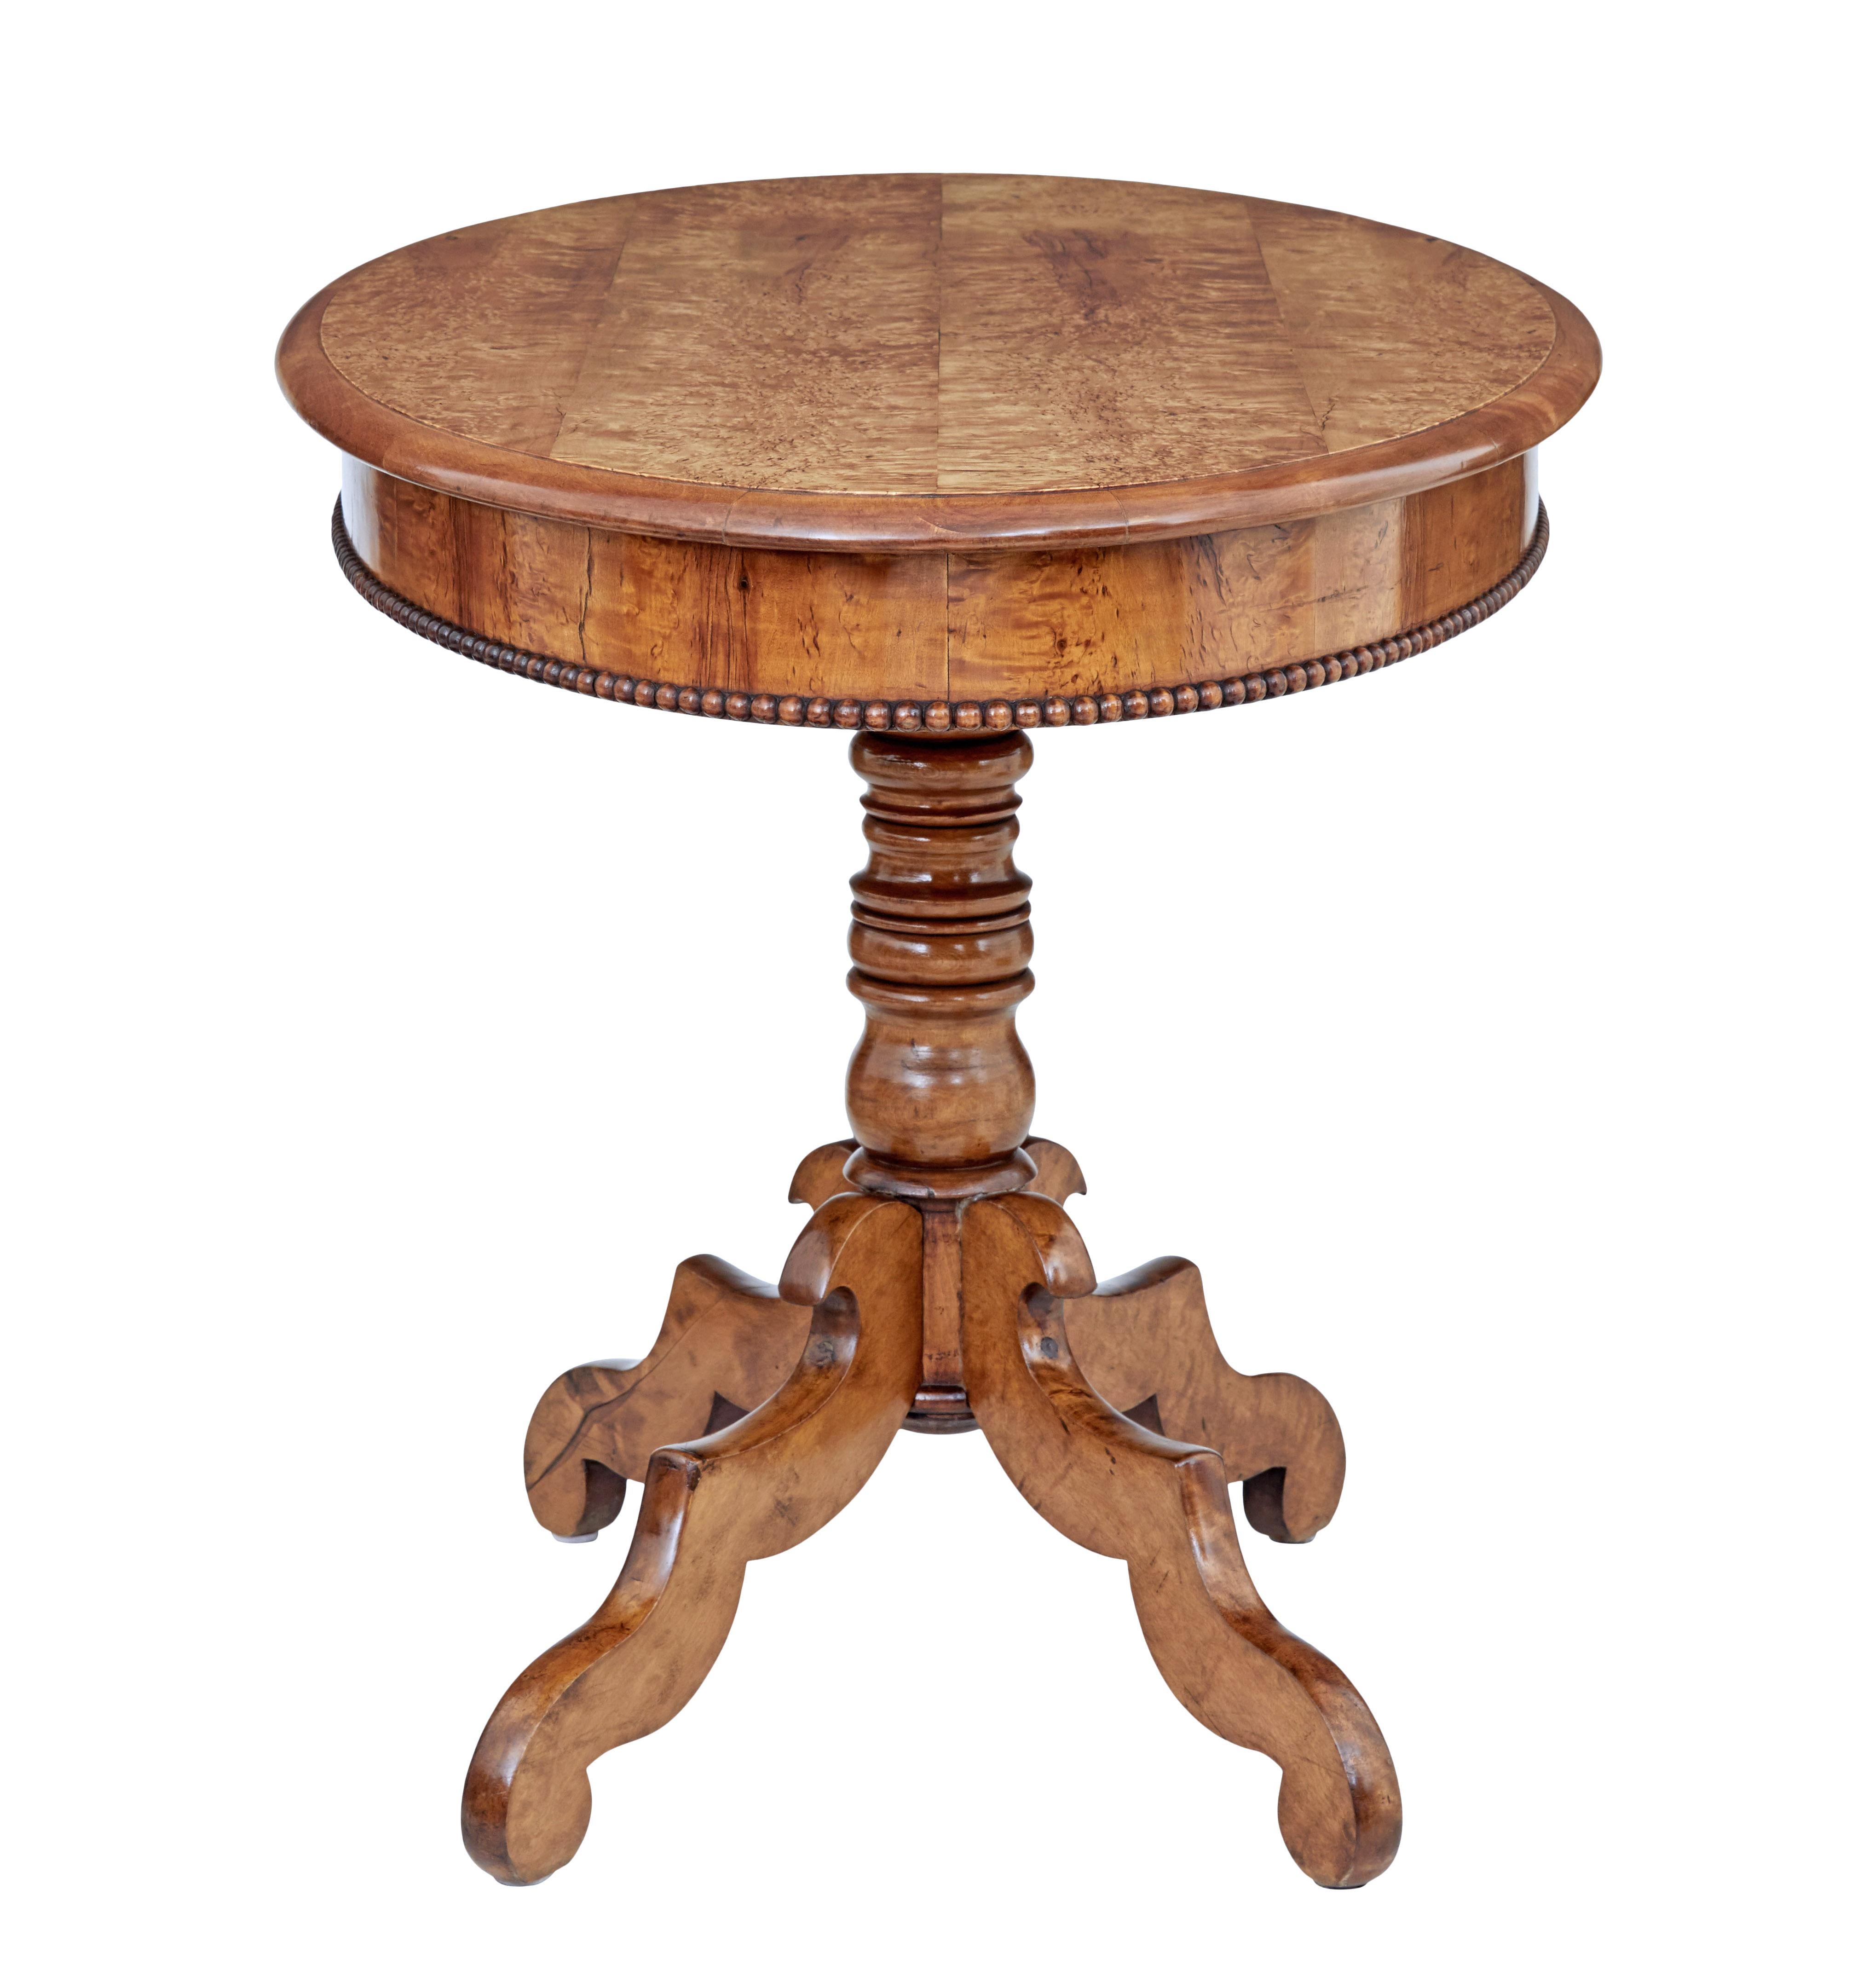 19th century burr birch oval occasional table, circa 1870.

Swedish burr birch table that has multiple uses due to its size. Beautiful burr birch top with rich golden color. Beaded edge detail to the apron. Standing on a turned column stem and